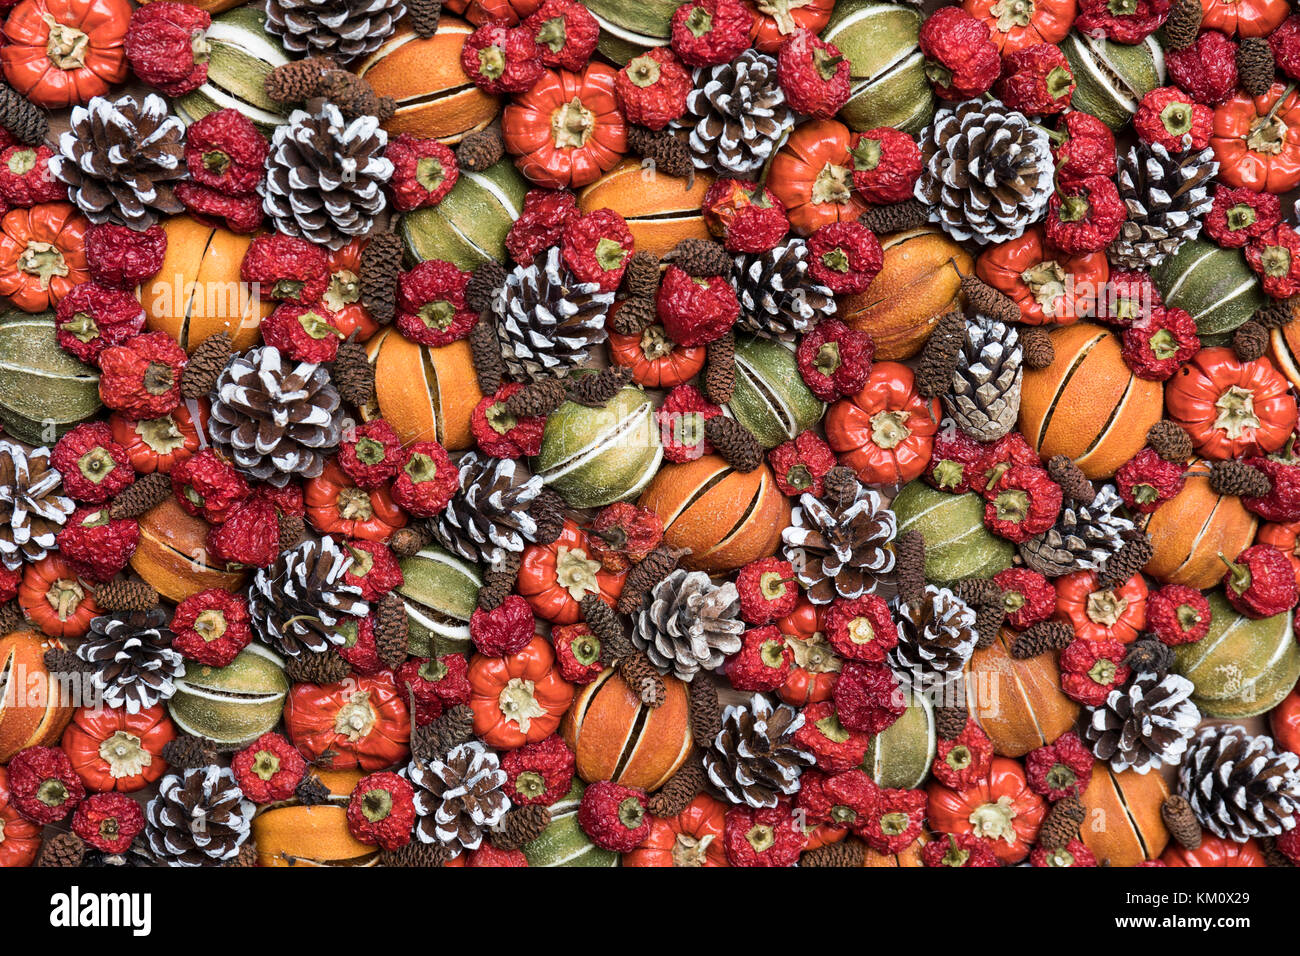 Close up of colourful festive Christmas dried fruit and cones Stock Photo